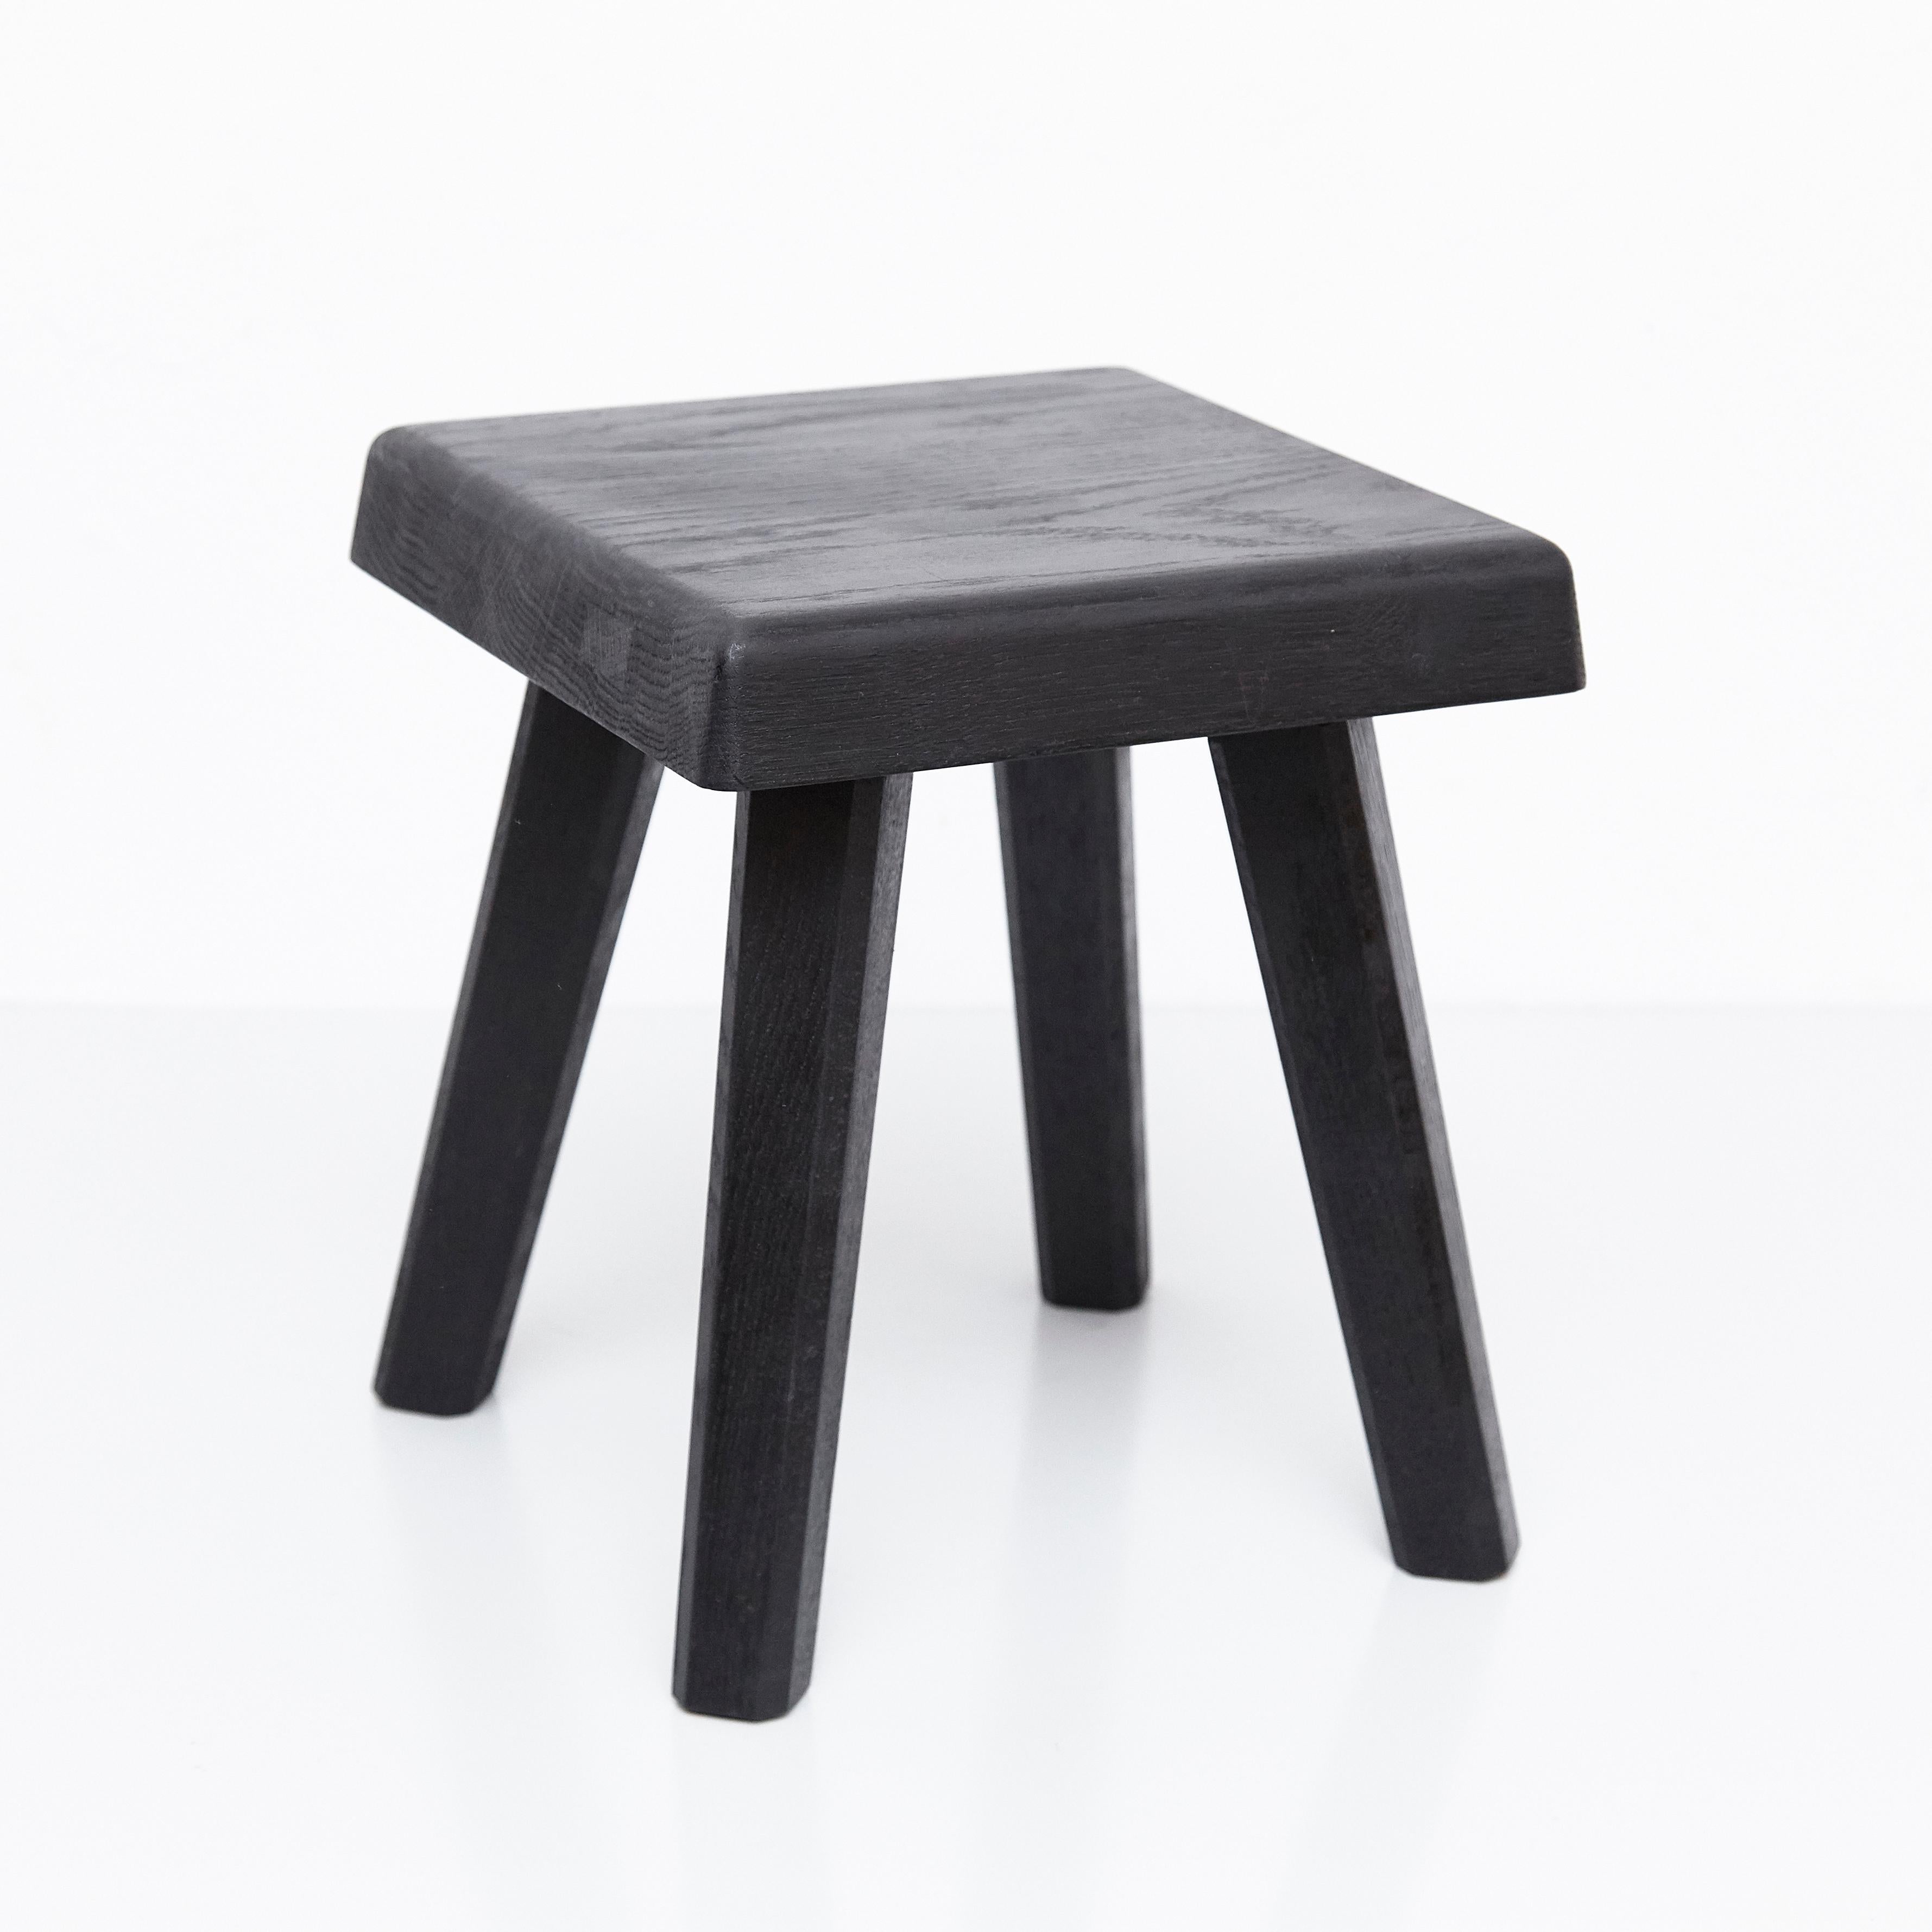 Stool designed by Pierre Chapo in 1960s.
Manufactured in France in 2019

Solid oakwood.
Small : 29 x 29 x 33 cm

In good original condition, with minor wear consistent with age and use, preserving a beautiful patina.

Pierre Chapo is born in